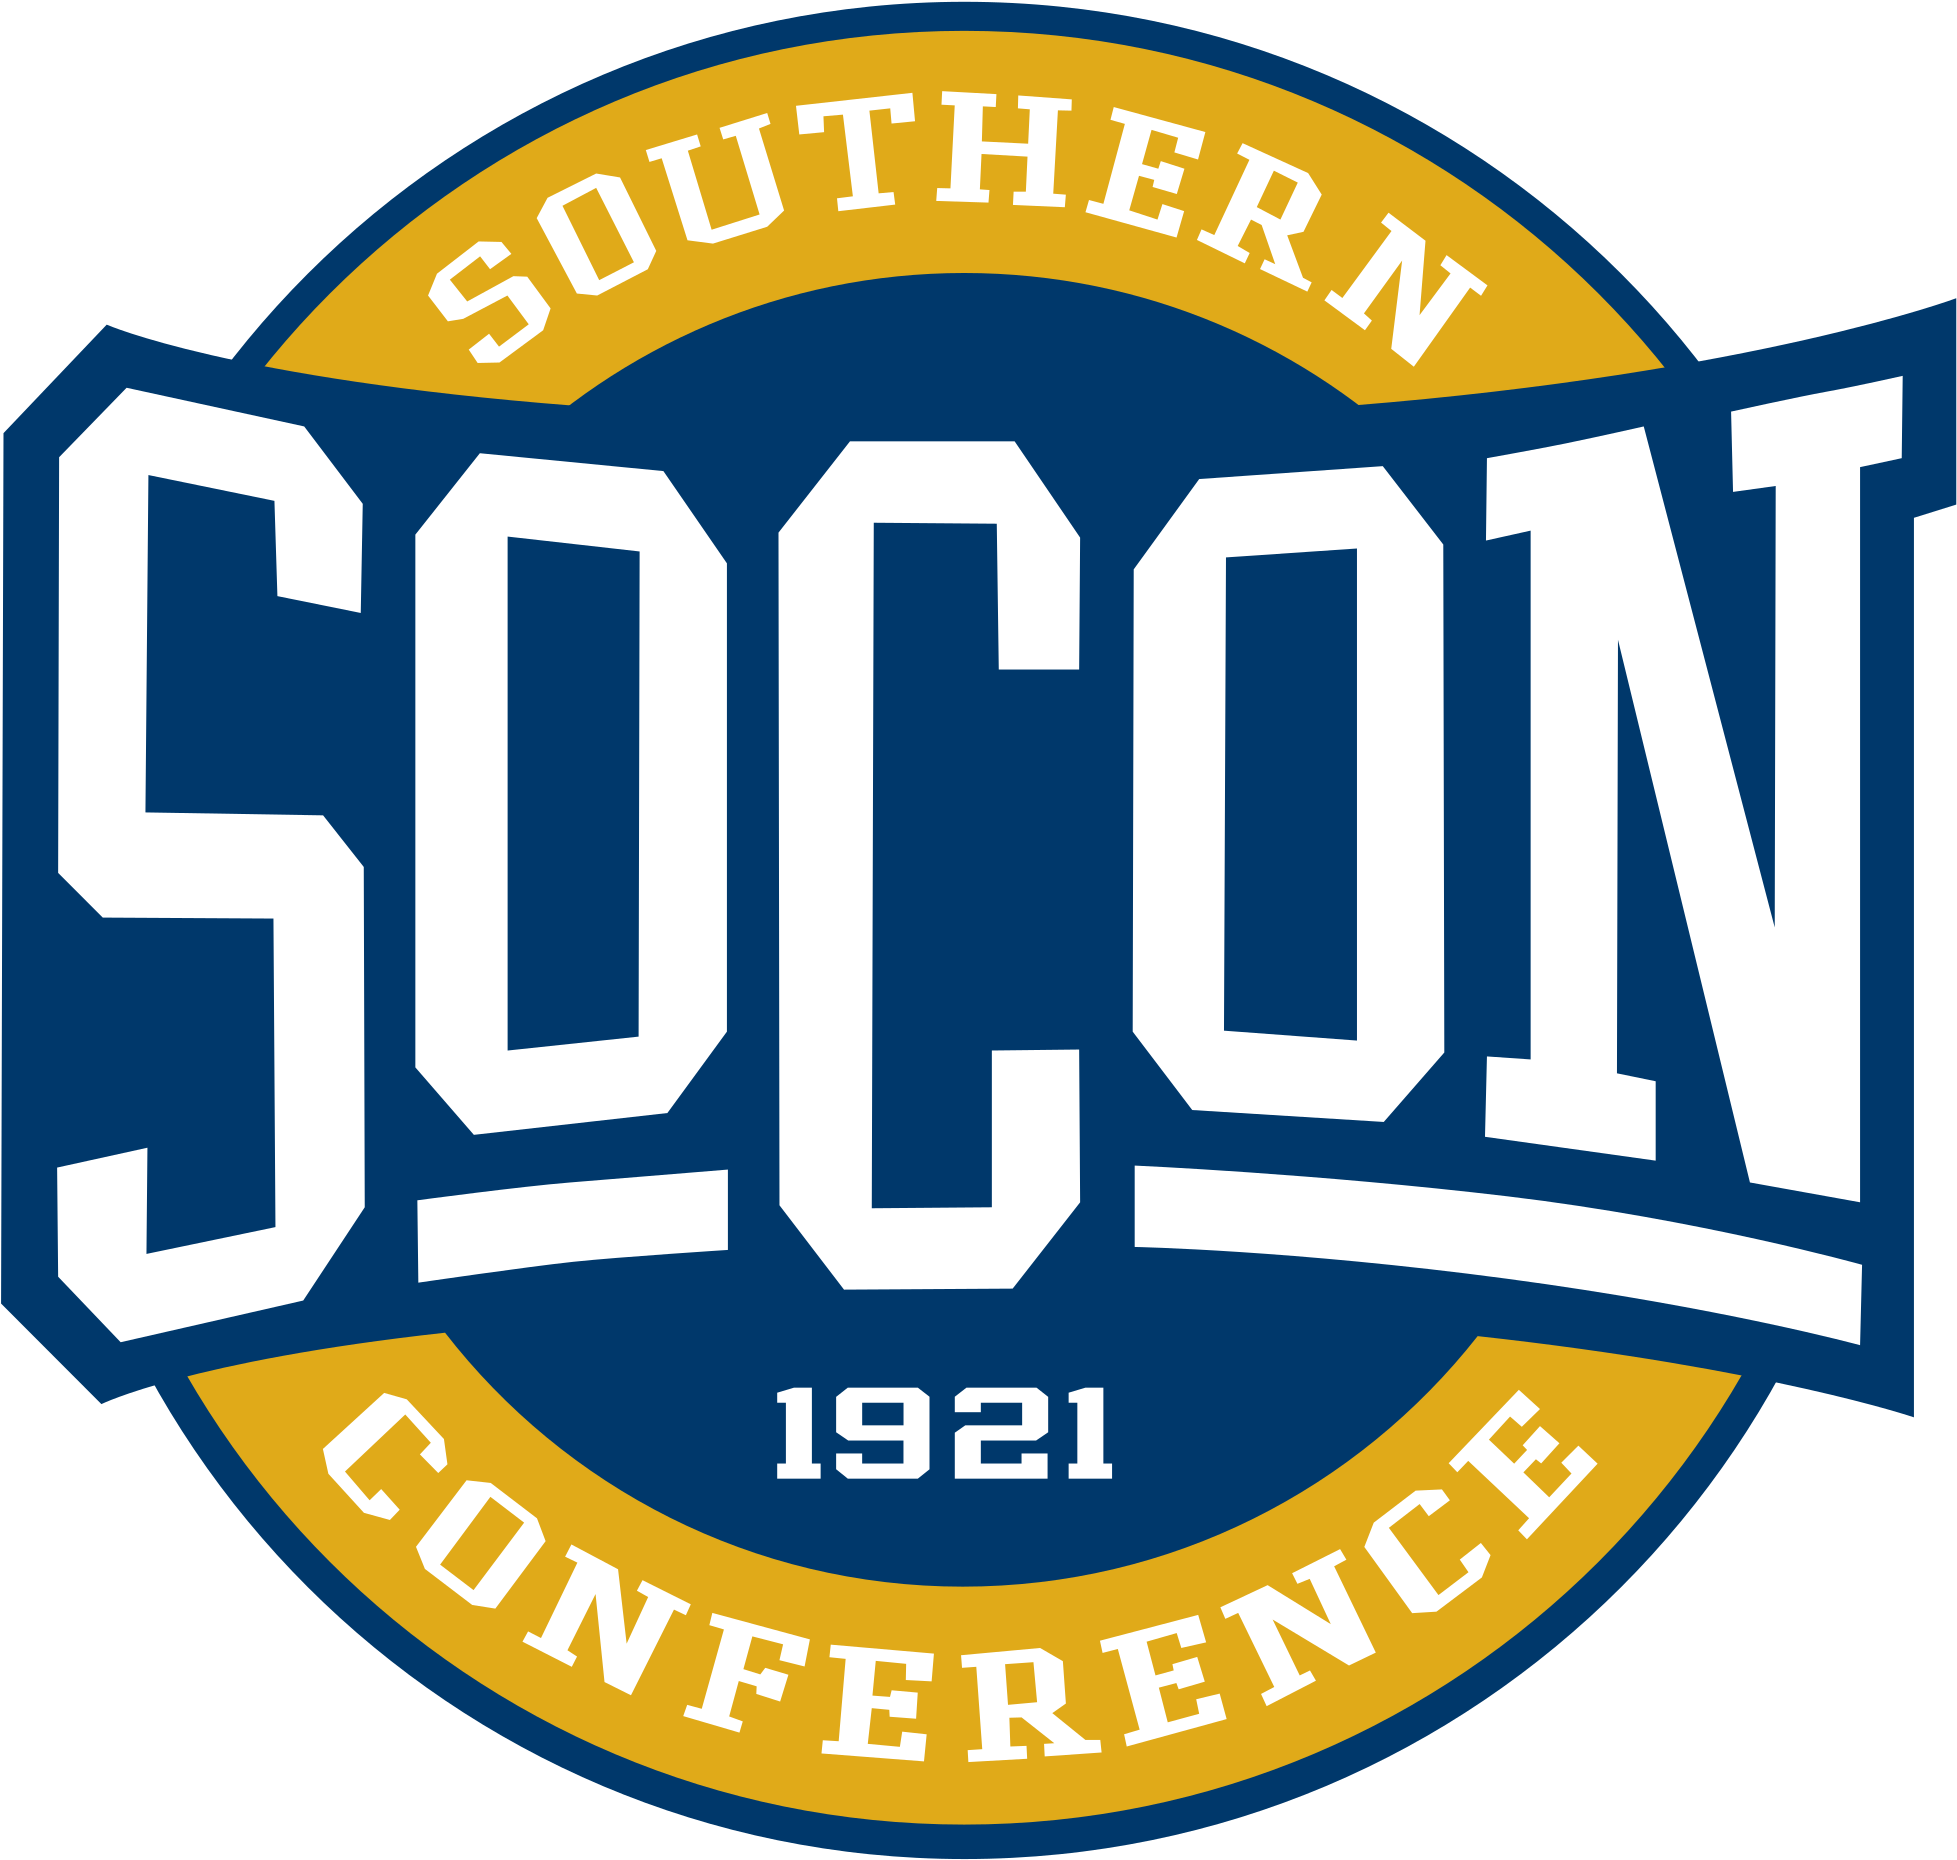 Socon's Logo In Chattanooga's Colors - Southern Conference (2000x1891)